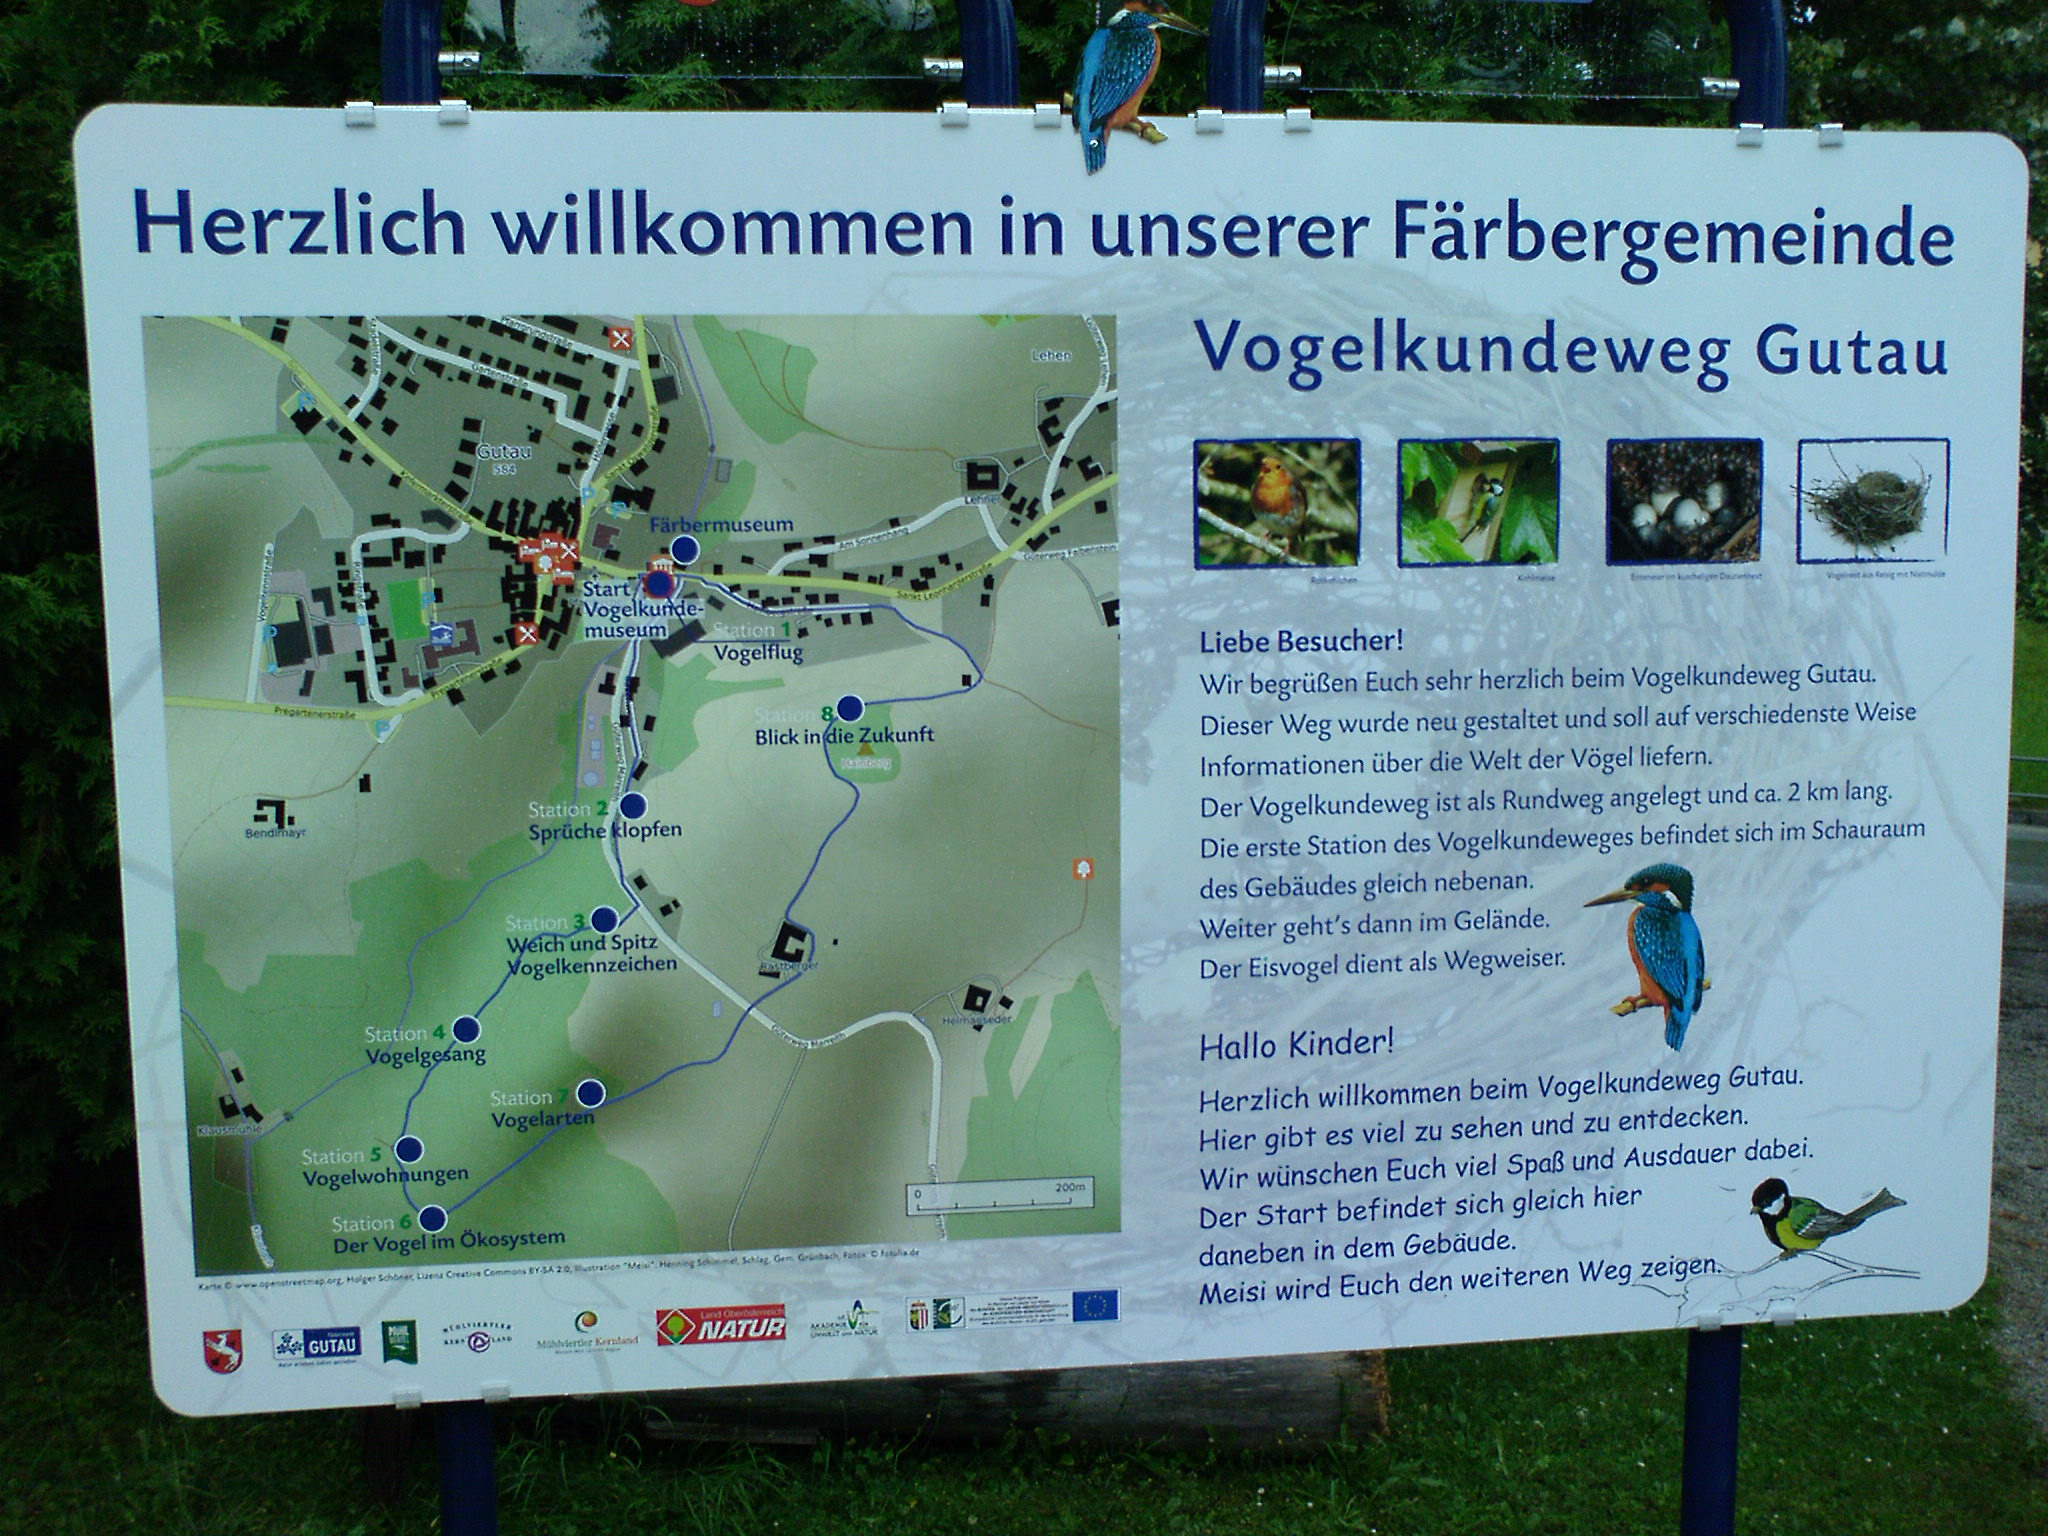 Information Display of the Birds Learning Path in Gutau